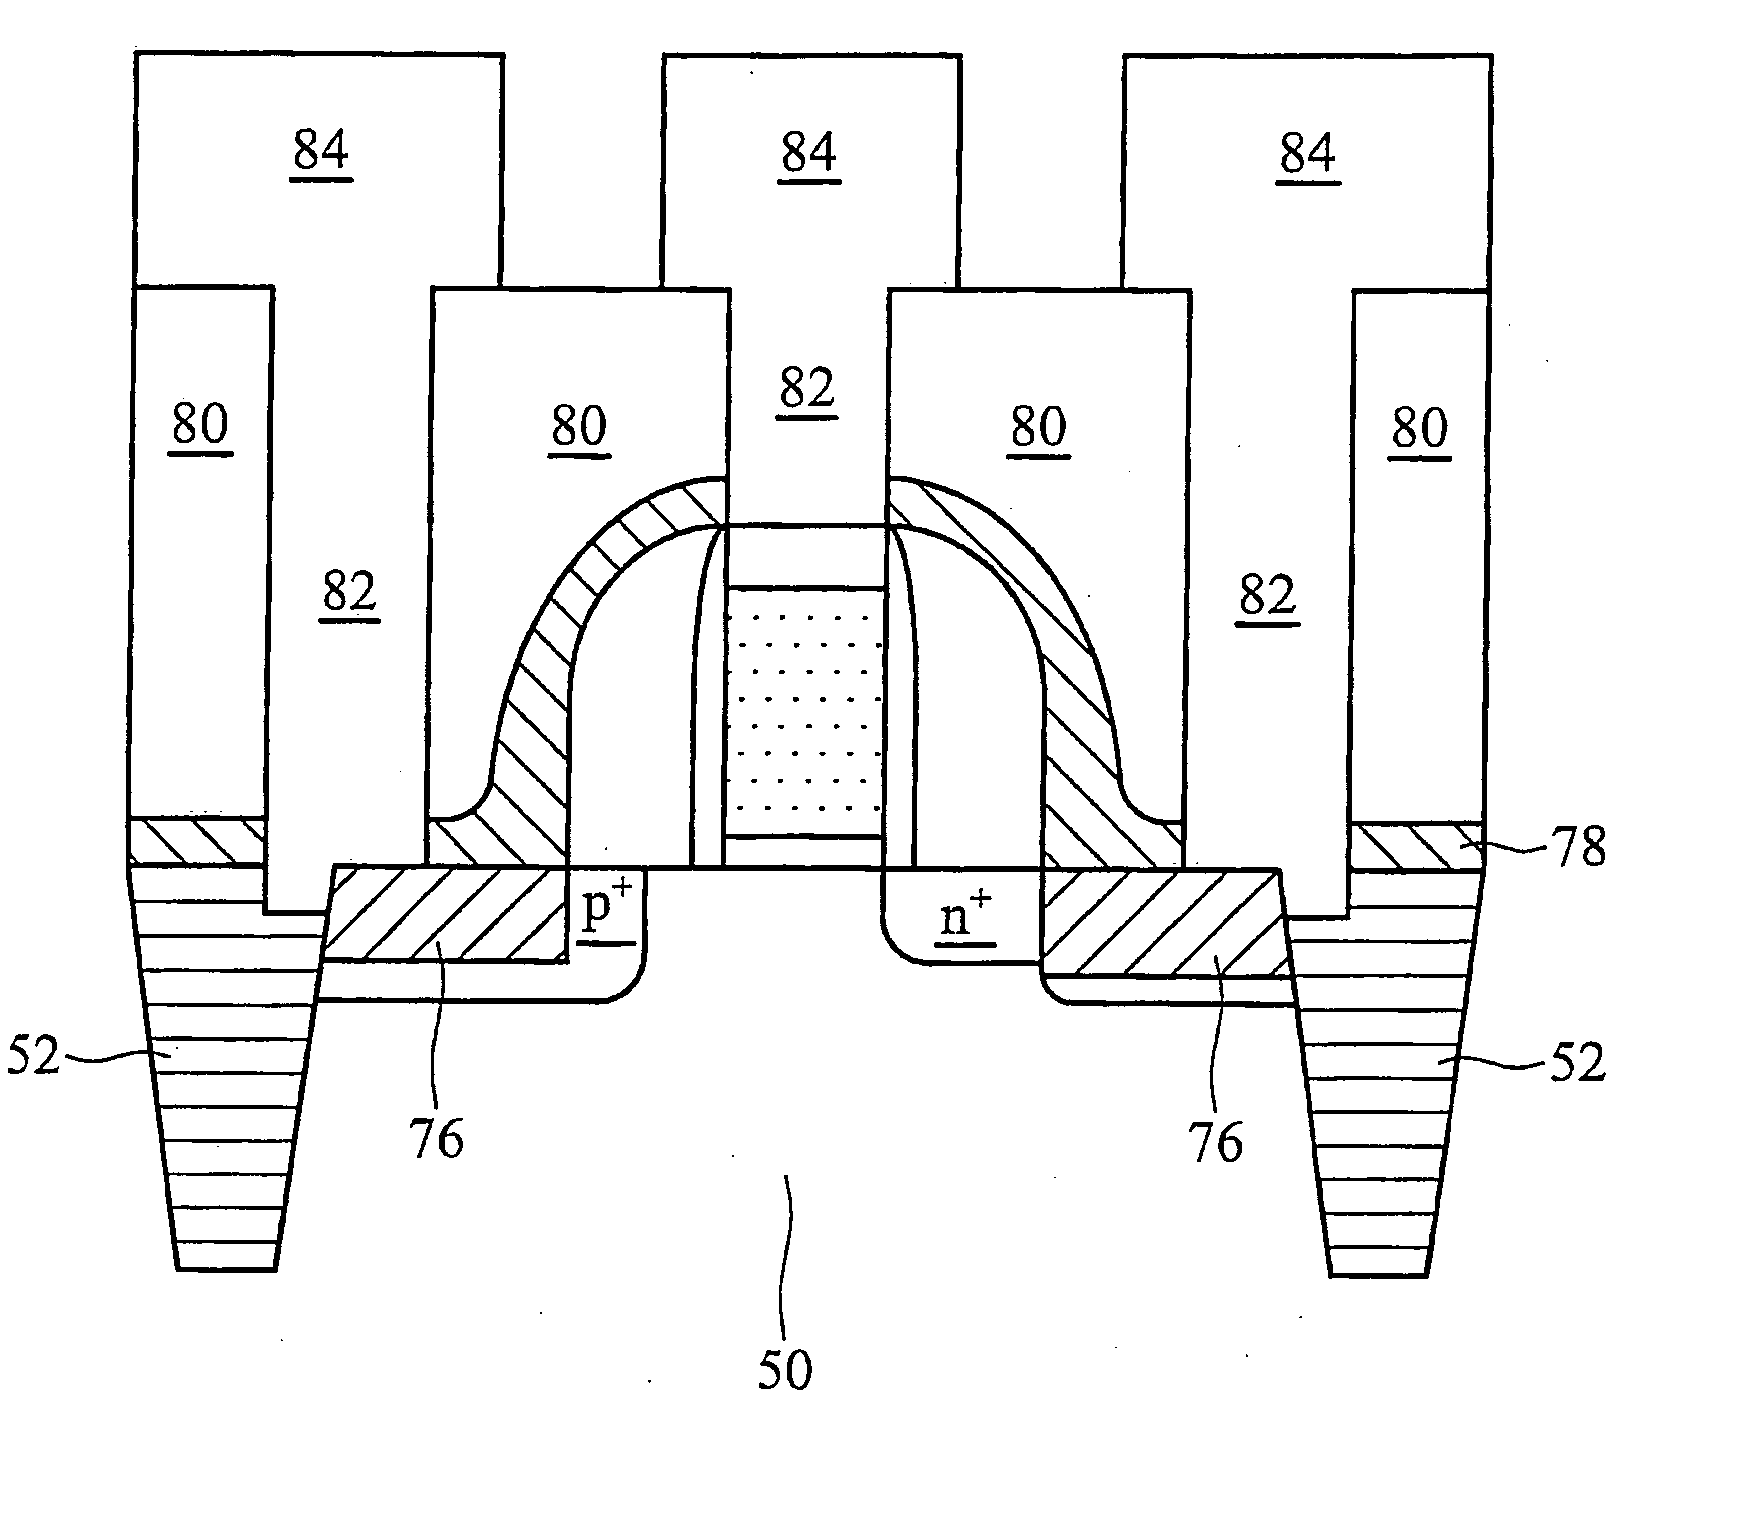 Self-aligned gated p-i-n diode for ultra-fast switching